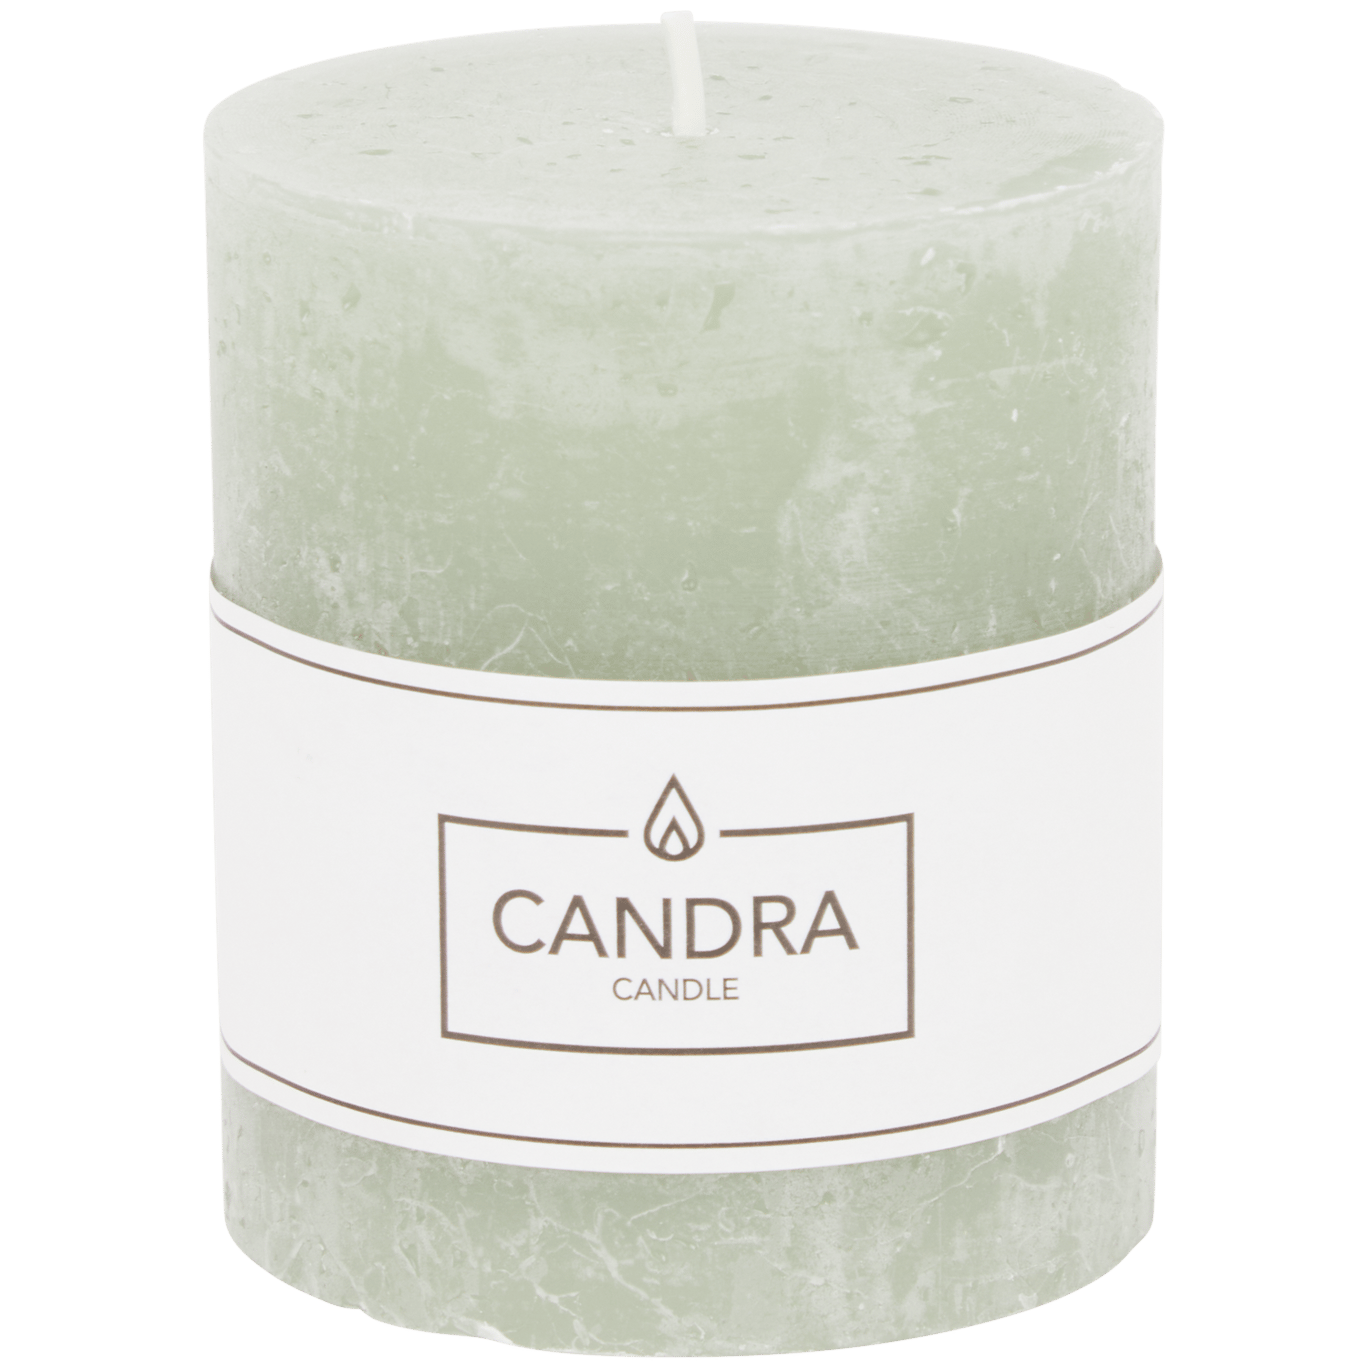 Bougie cylindrique Candra Vert sauge